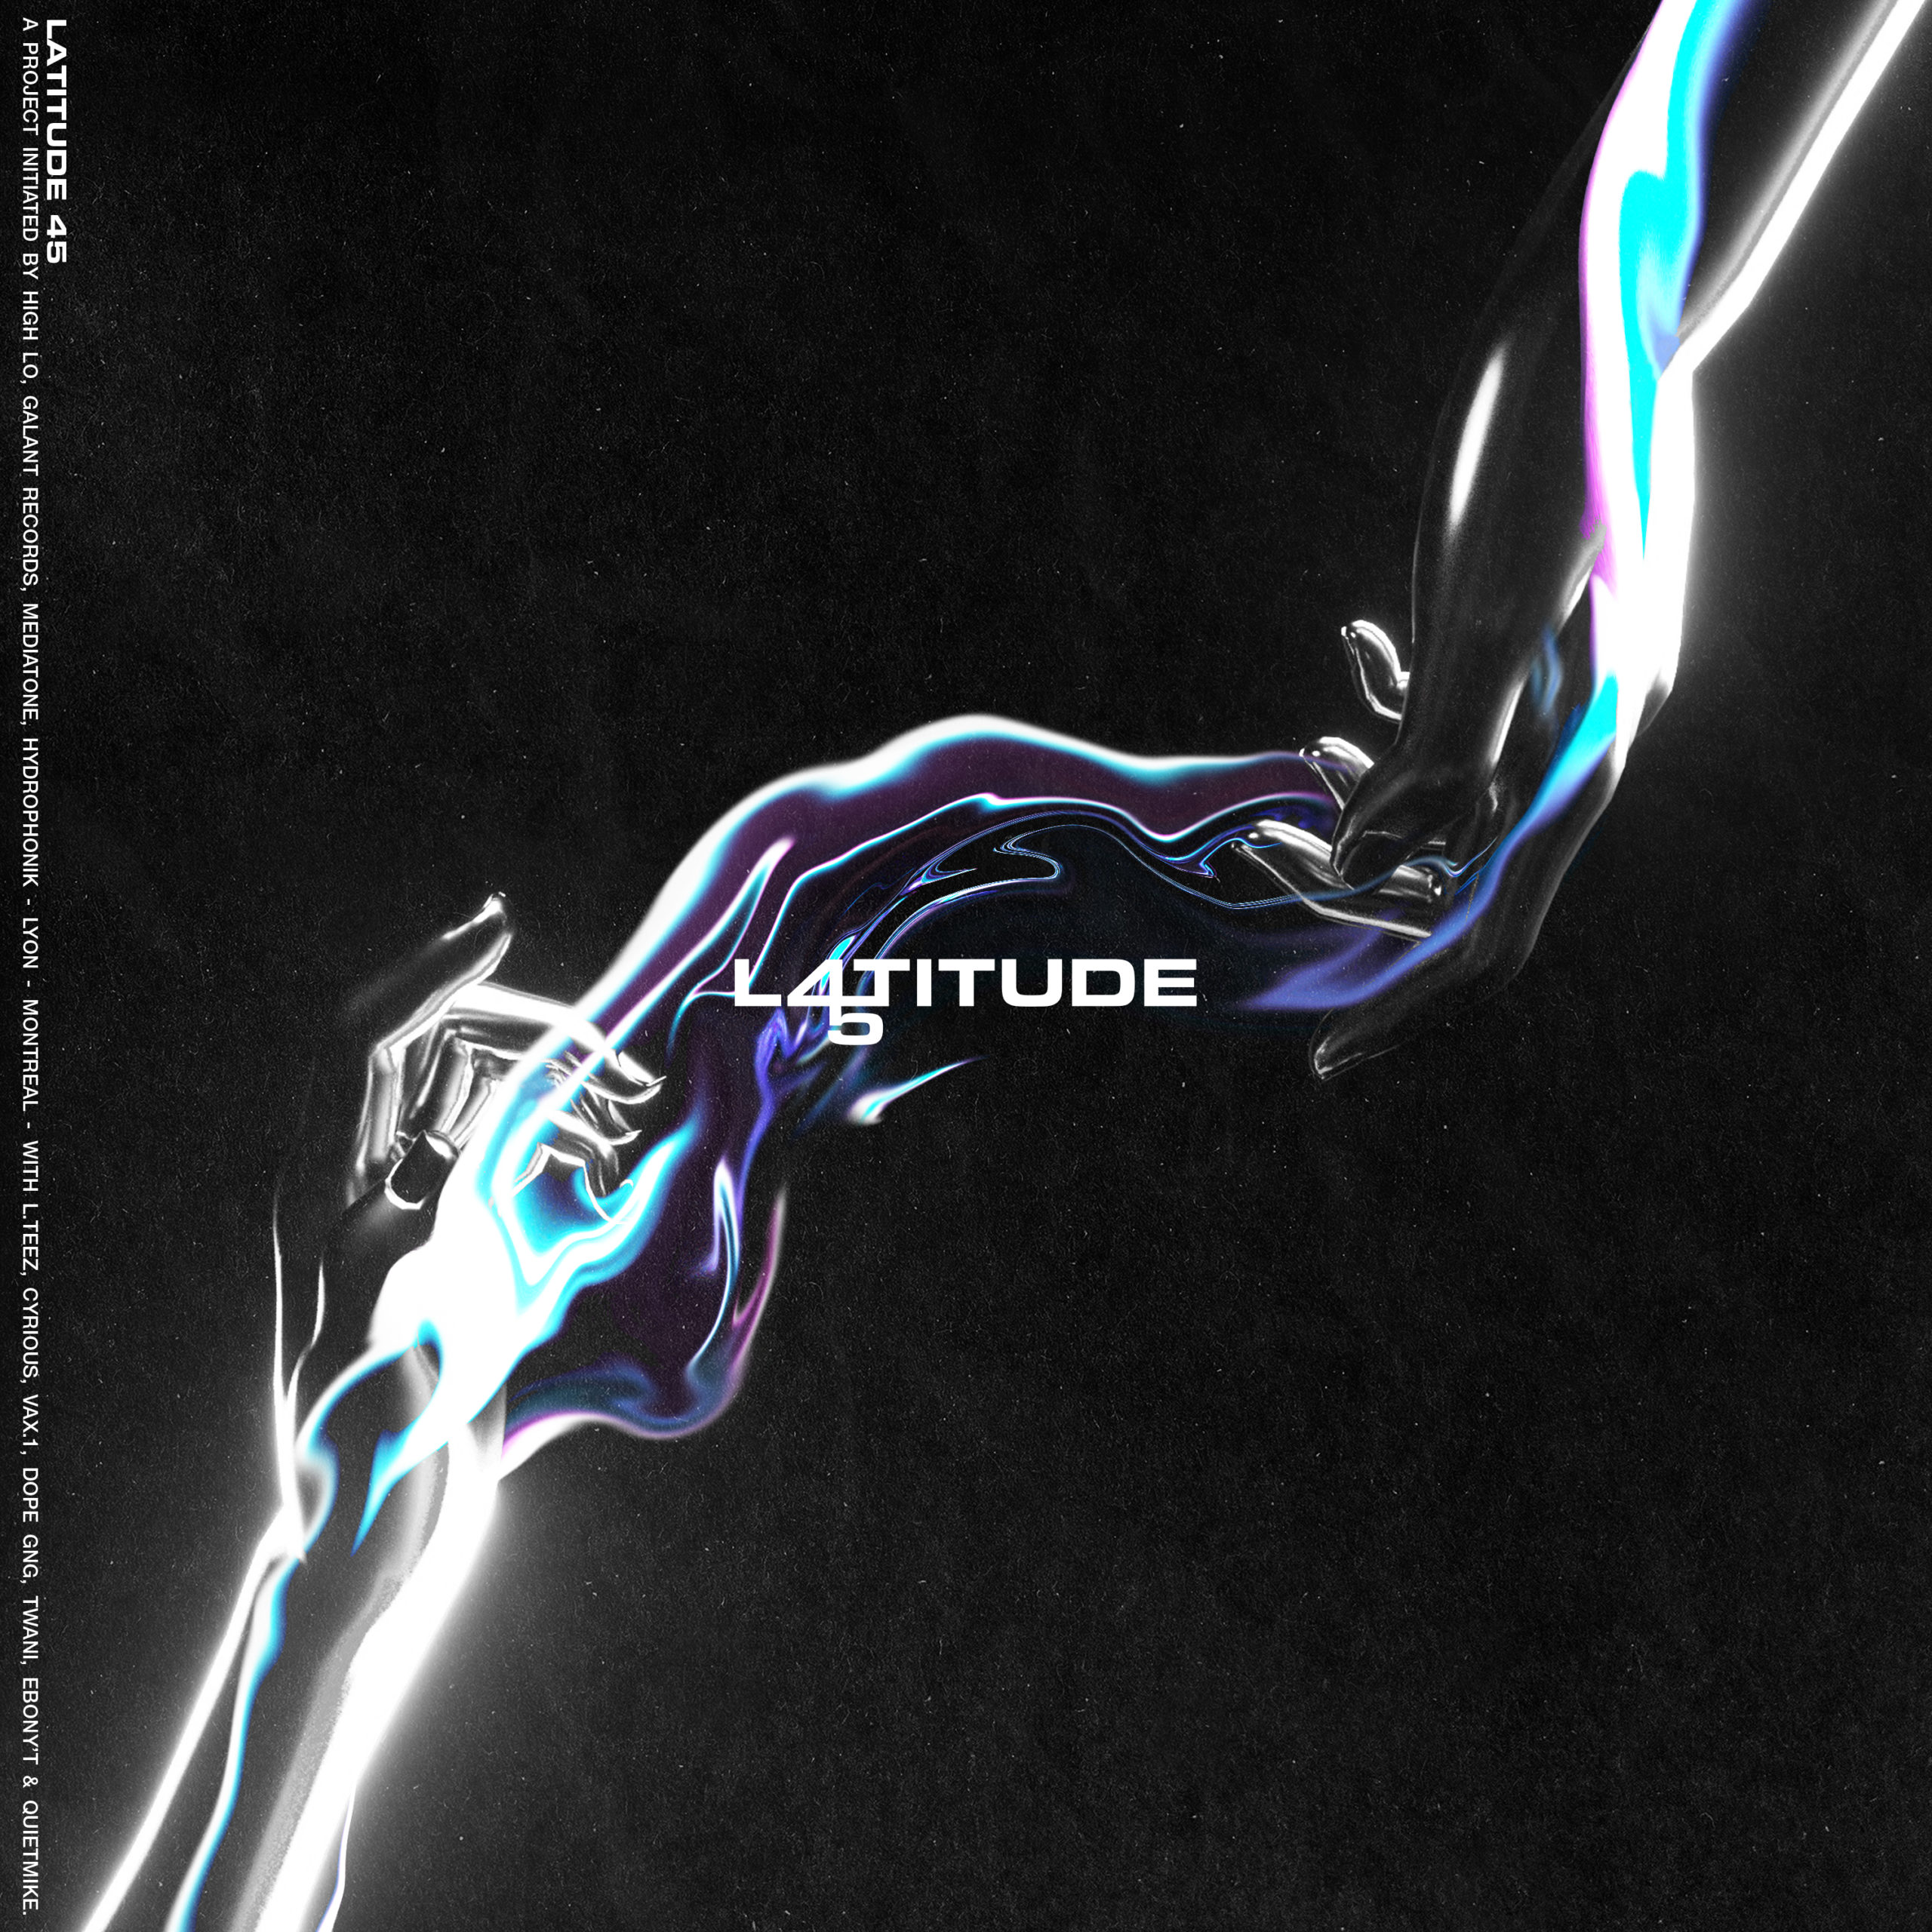 Latitude 45 reveals its first EP soon!